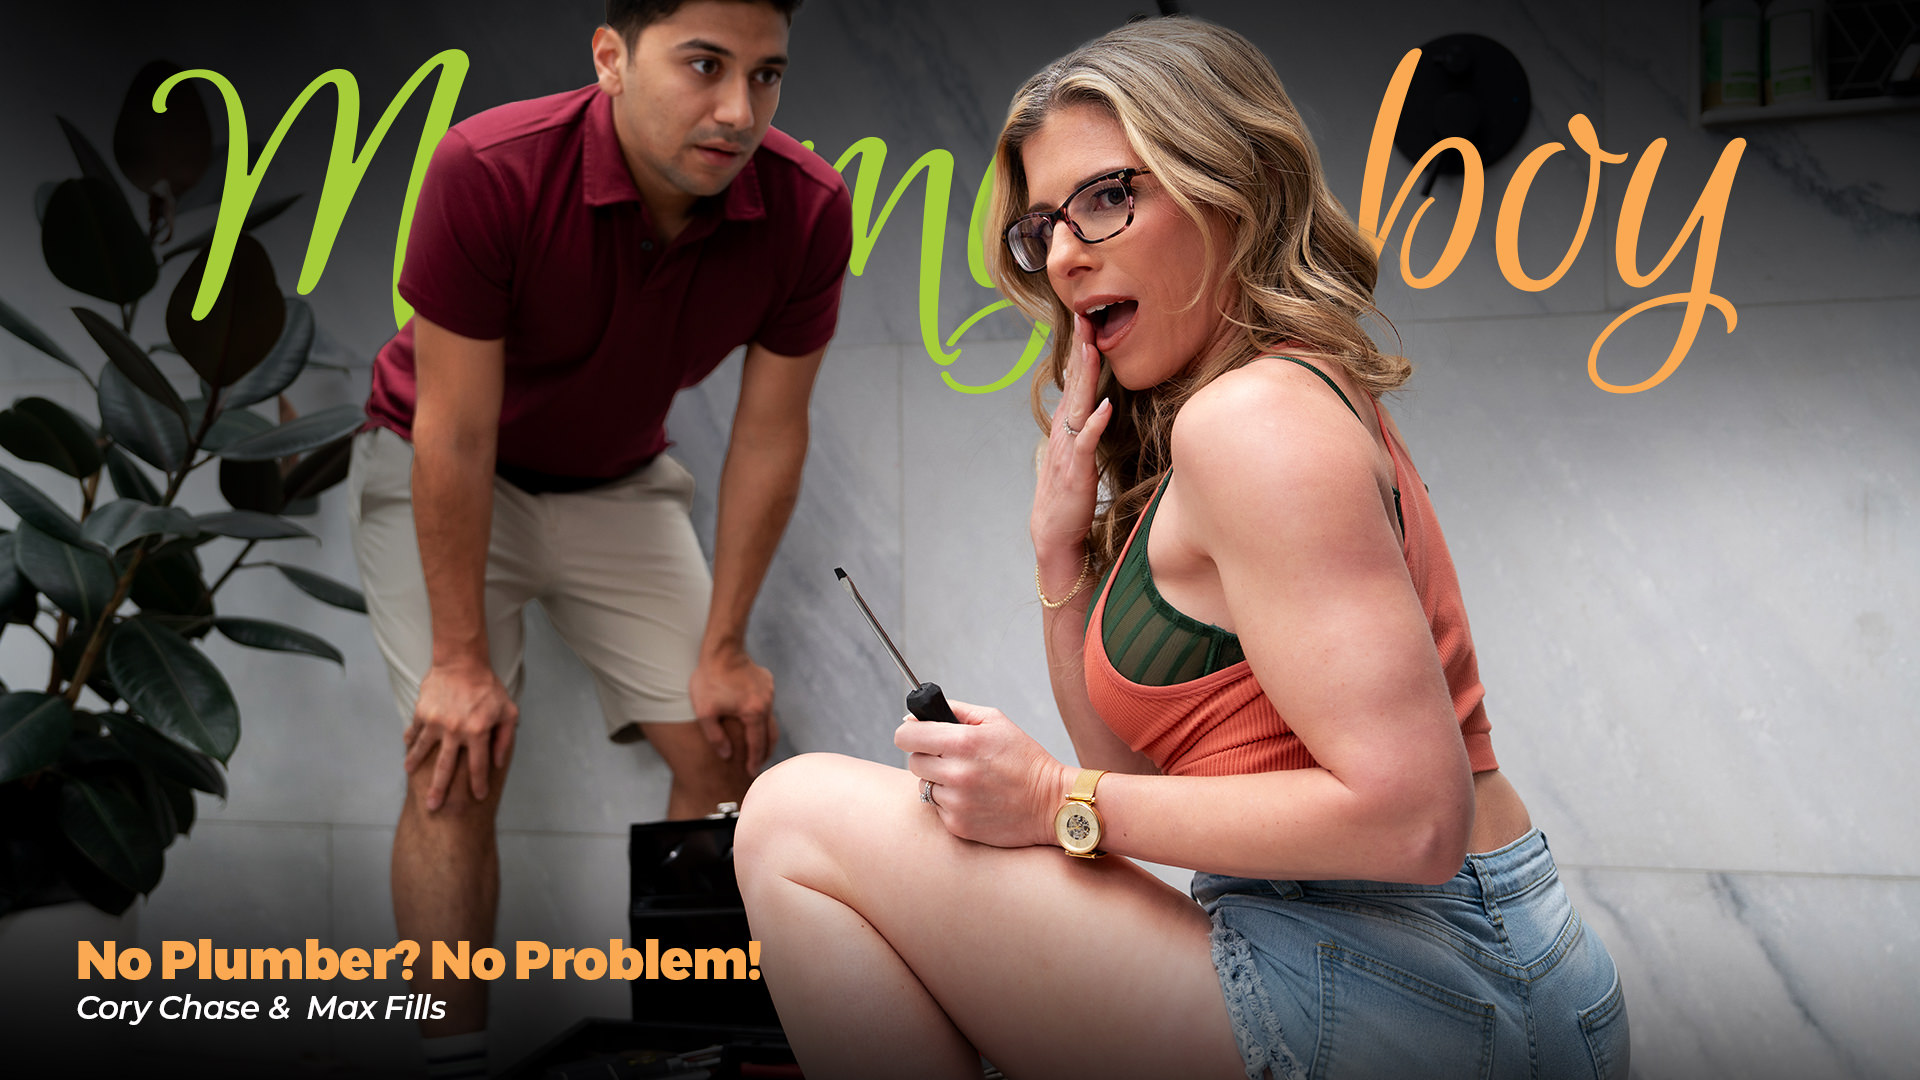 No Plumber? No Problem! – Cory Chase, Max Fills – Mommys Boy – Adult Time